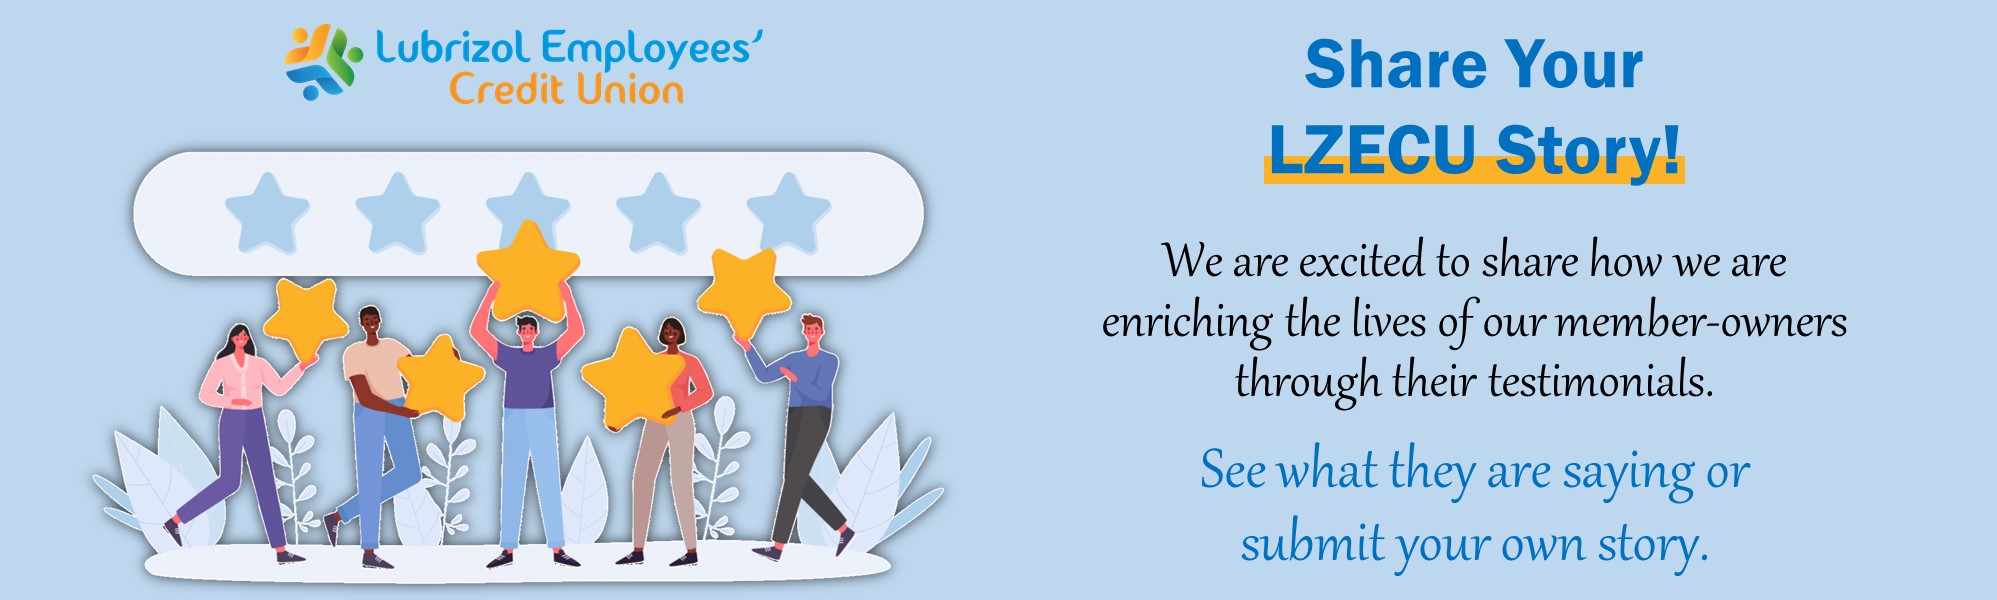 text: what our members are saying. Clipart of people holding stars. Click to submit your story